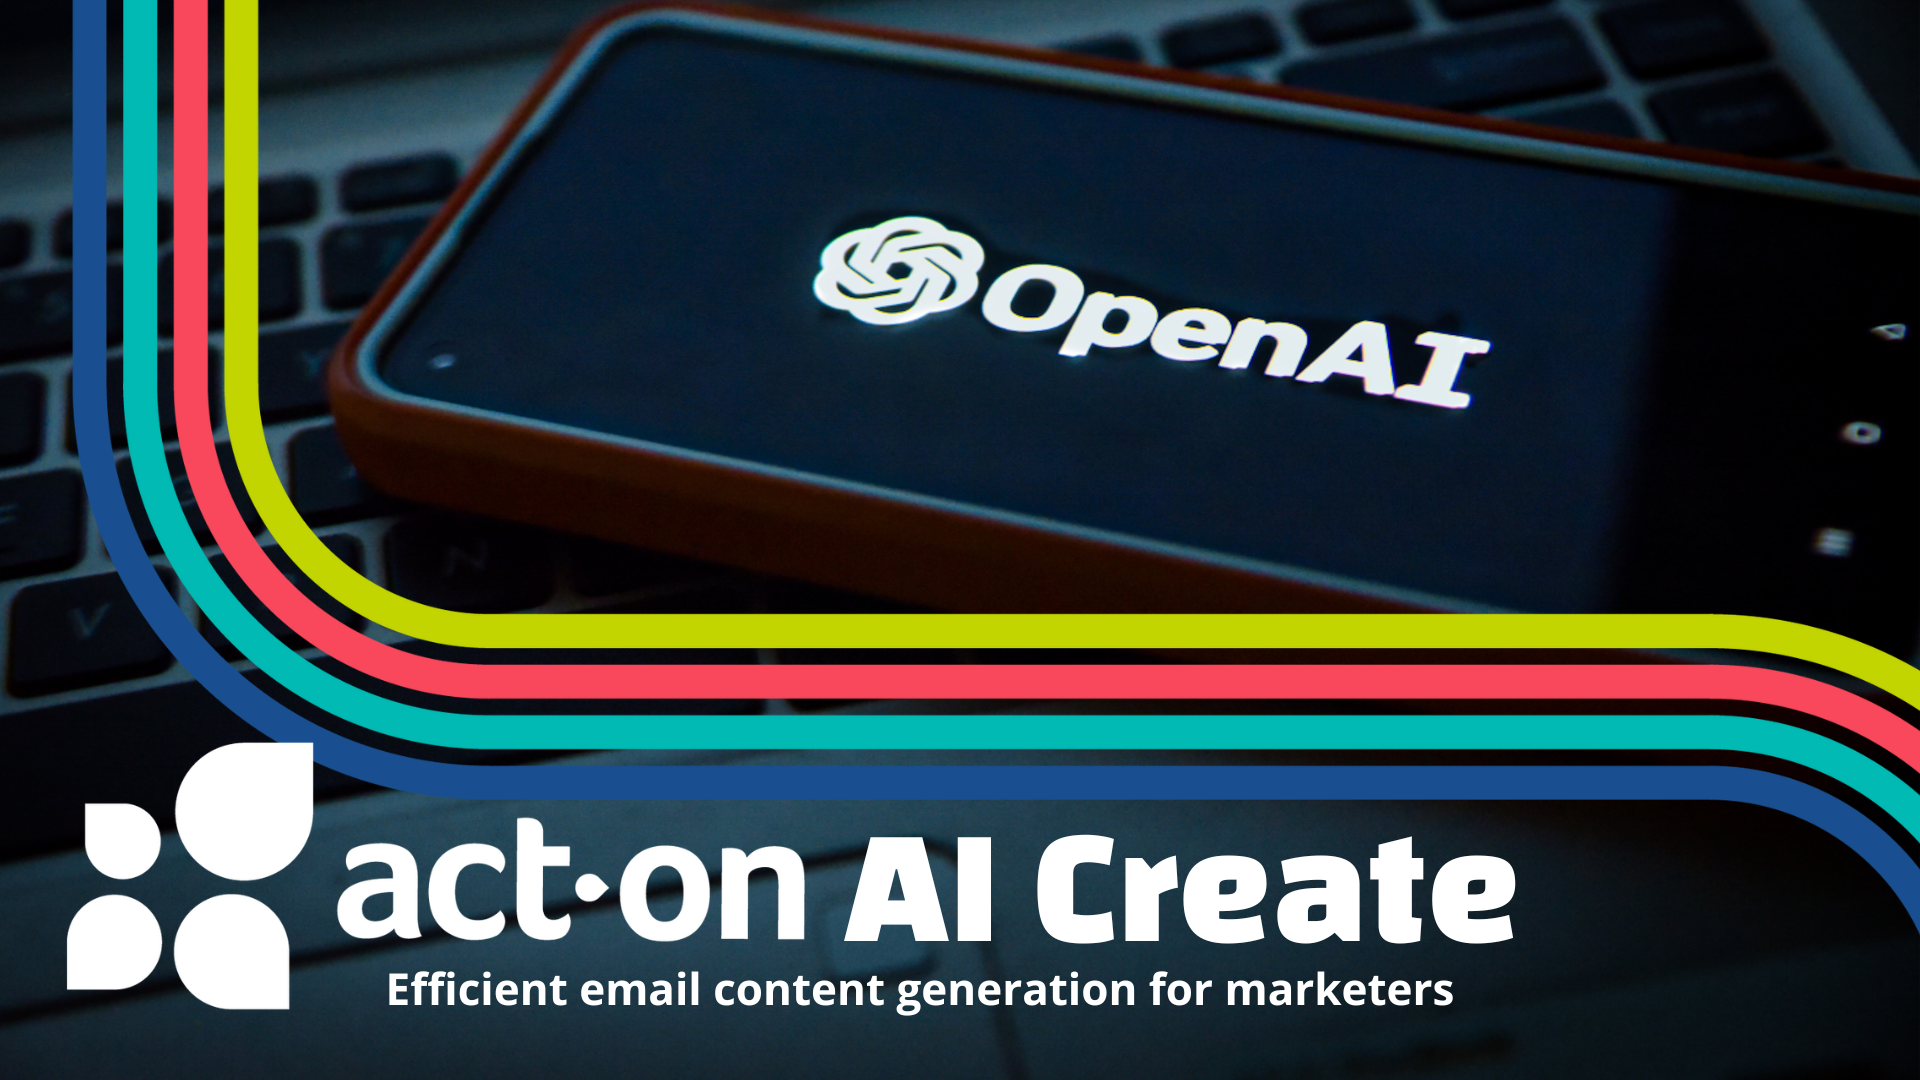 Act-On Software, a leading marketing automation platform, is launching AI Create to help marketers generate efficient, compelling email content.